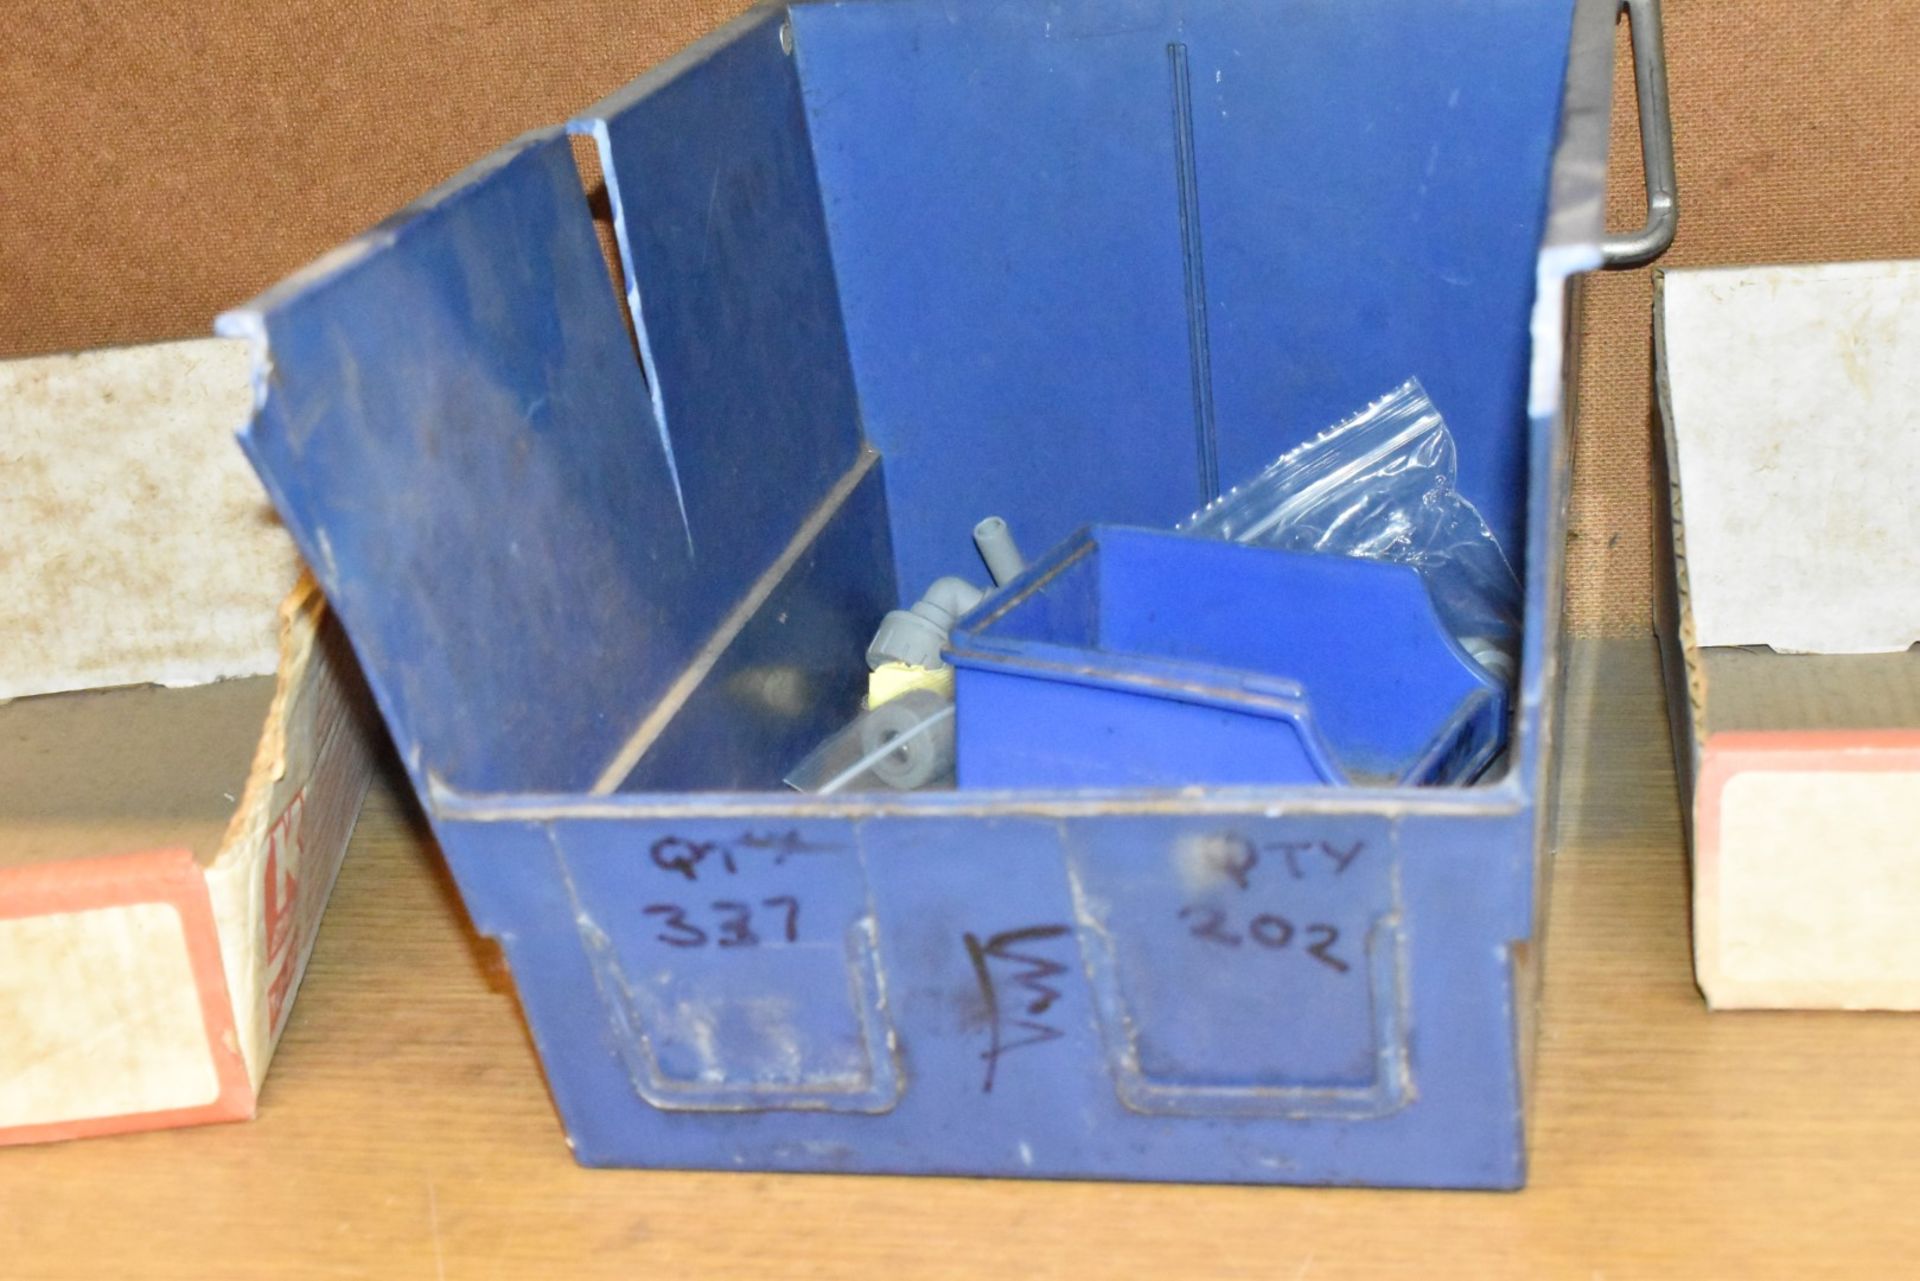 1 x Large Assorted Collection of Plumbing Parts, Bathroom Accessories, Wire Cages, Linbins and More - Image 133 of 217